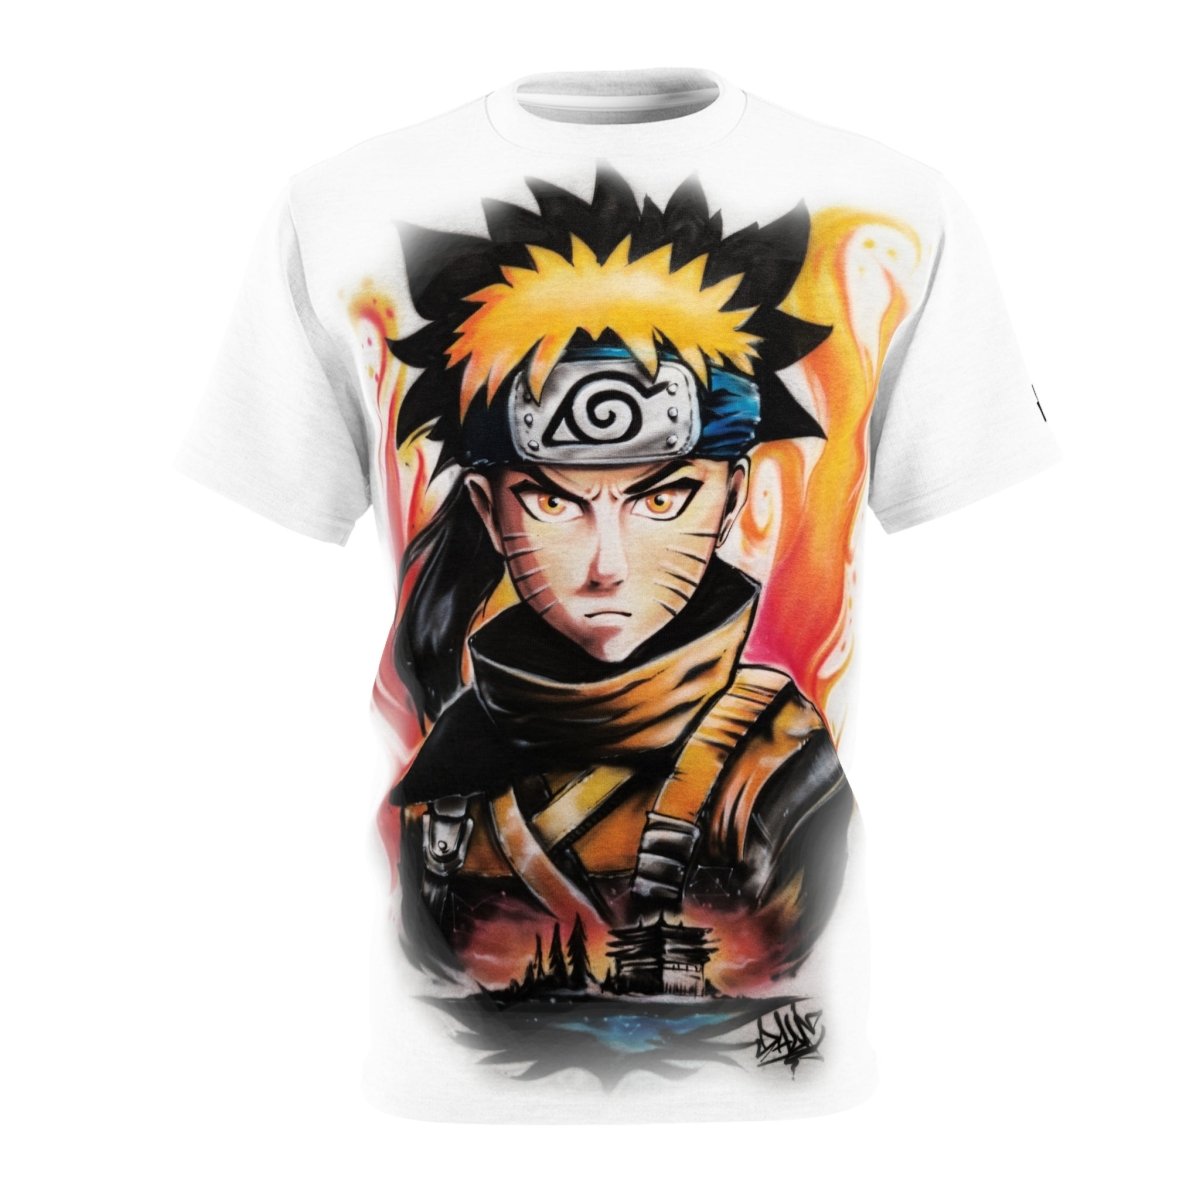 Anime / Games / Movie Character T-shirt Prints